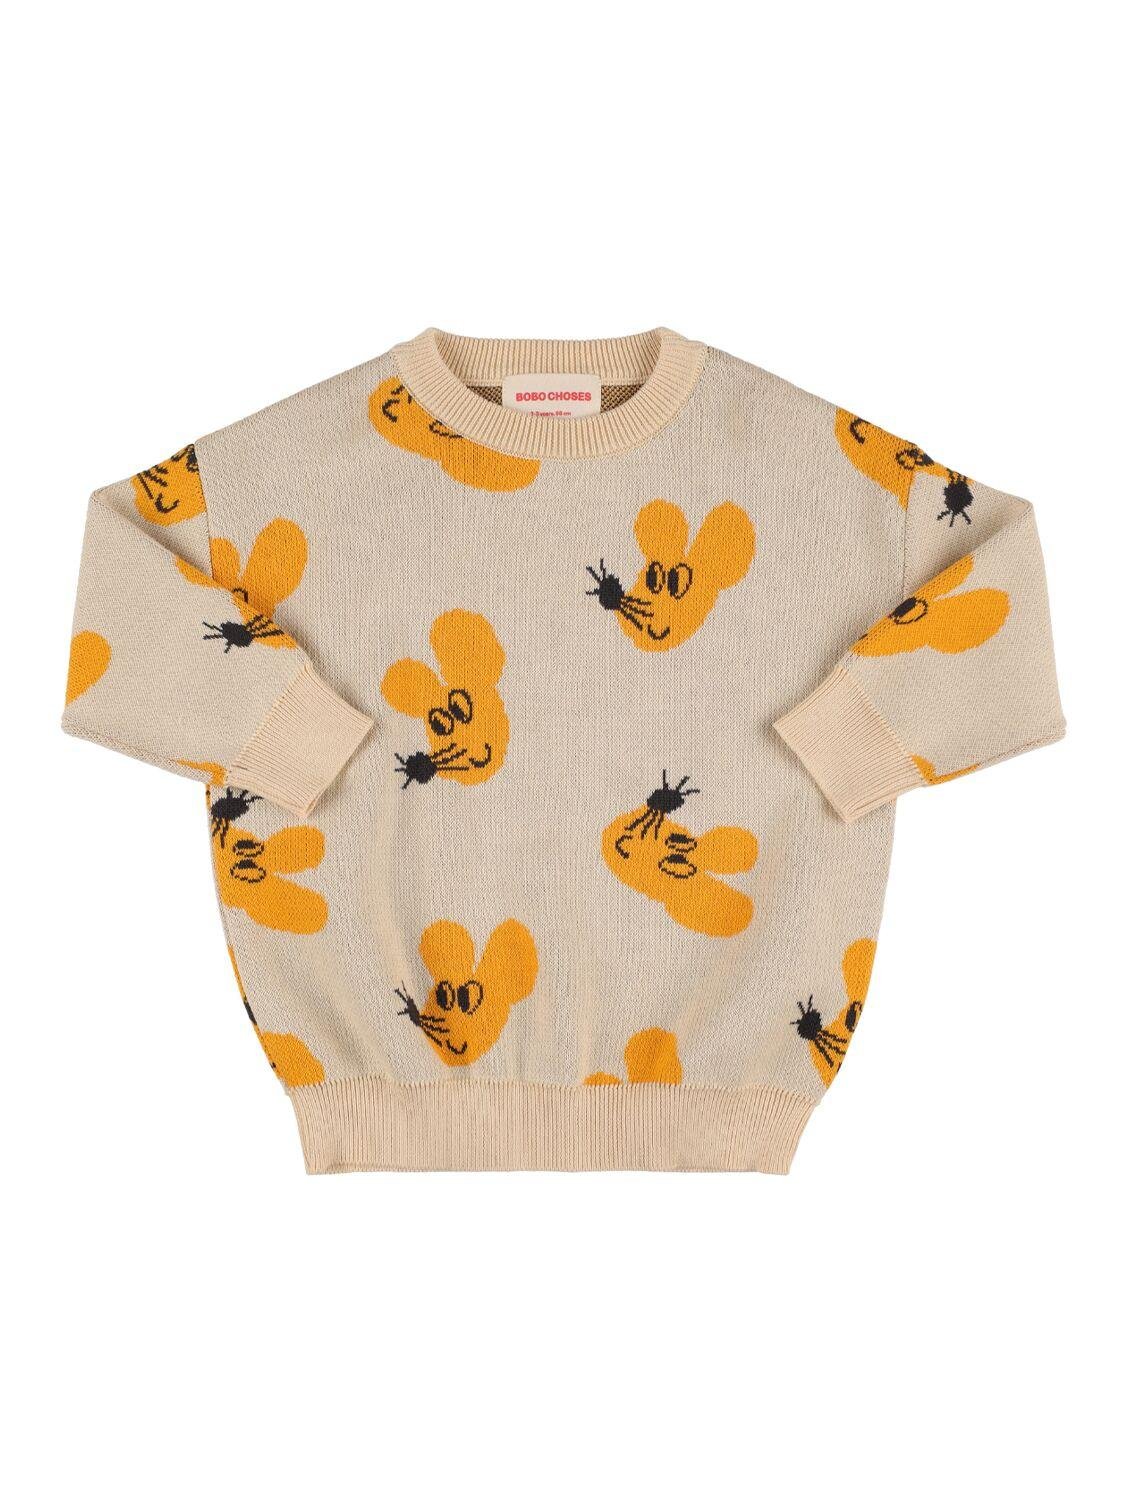 Mouse Print Cotton Sweater by BOBO CHOSES